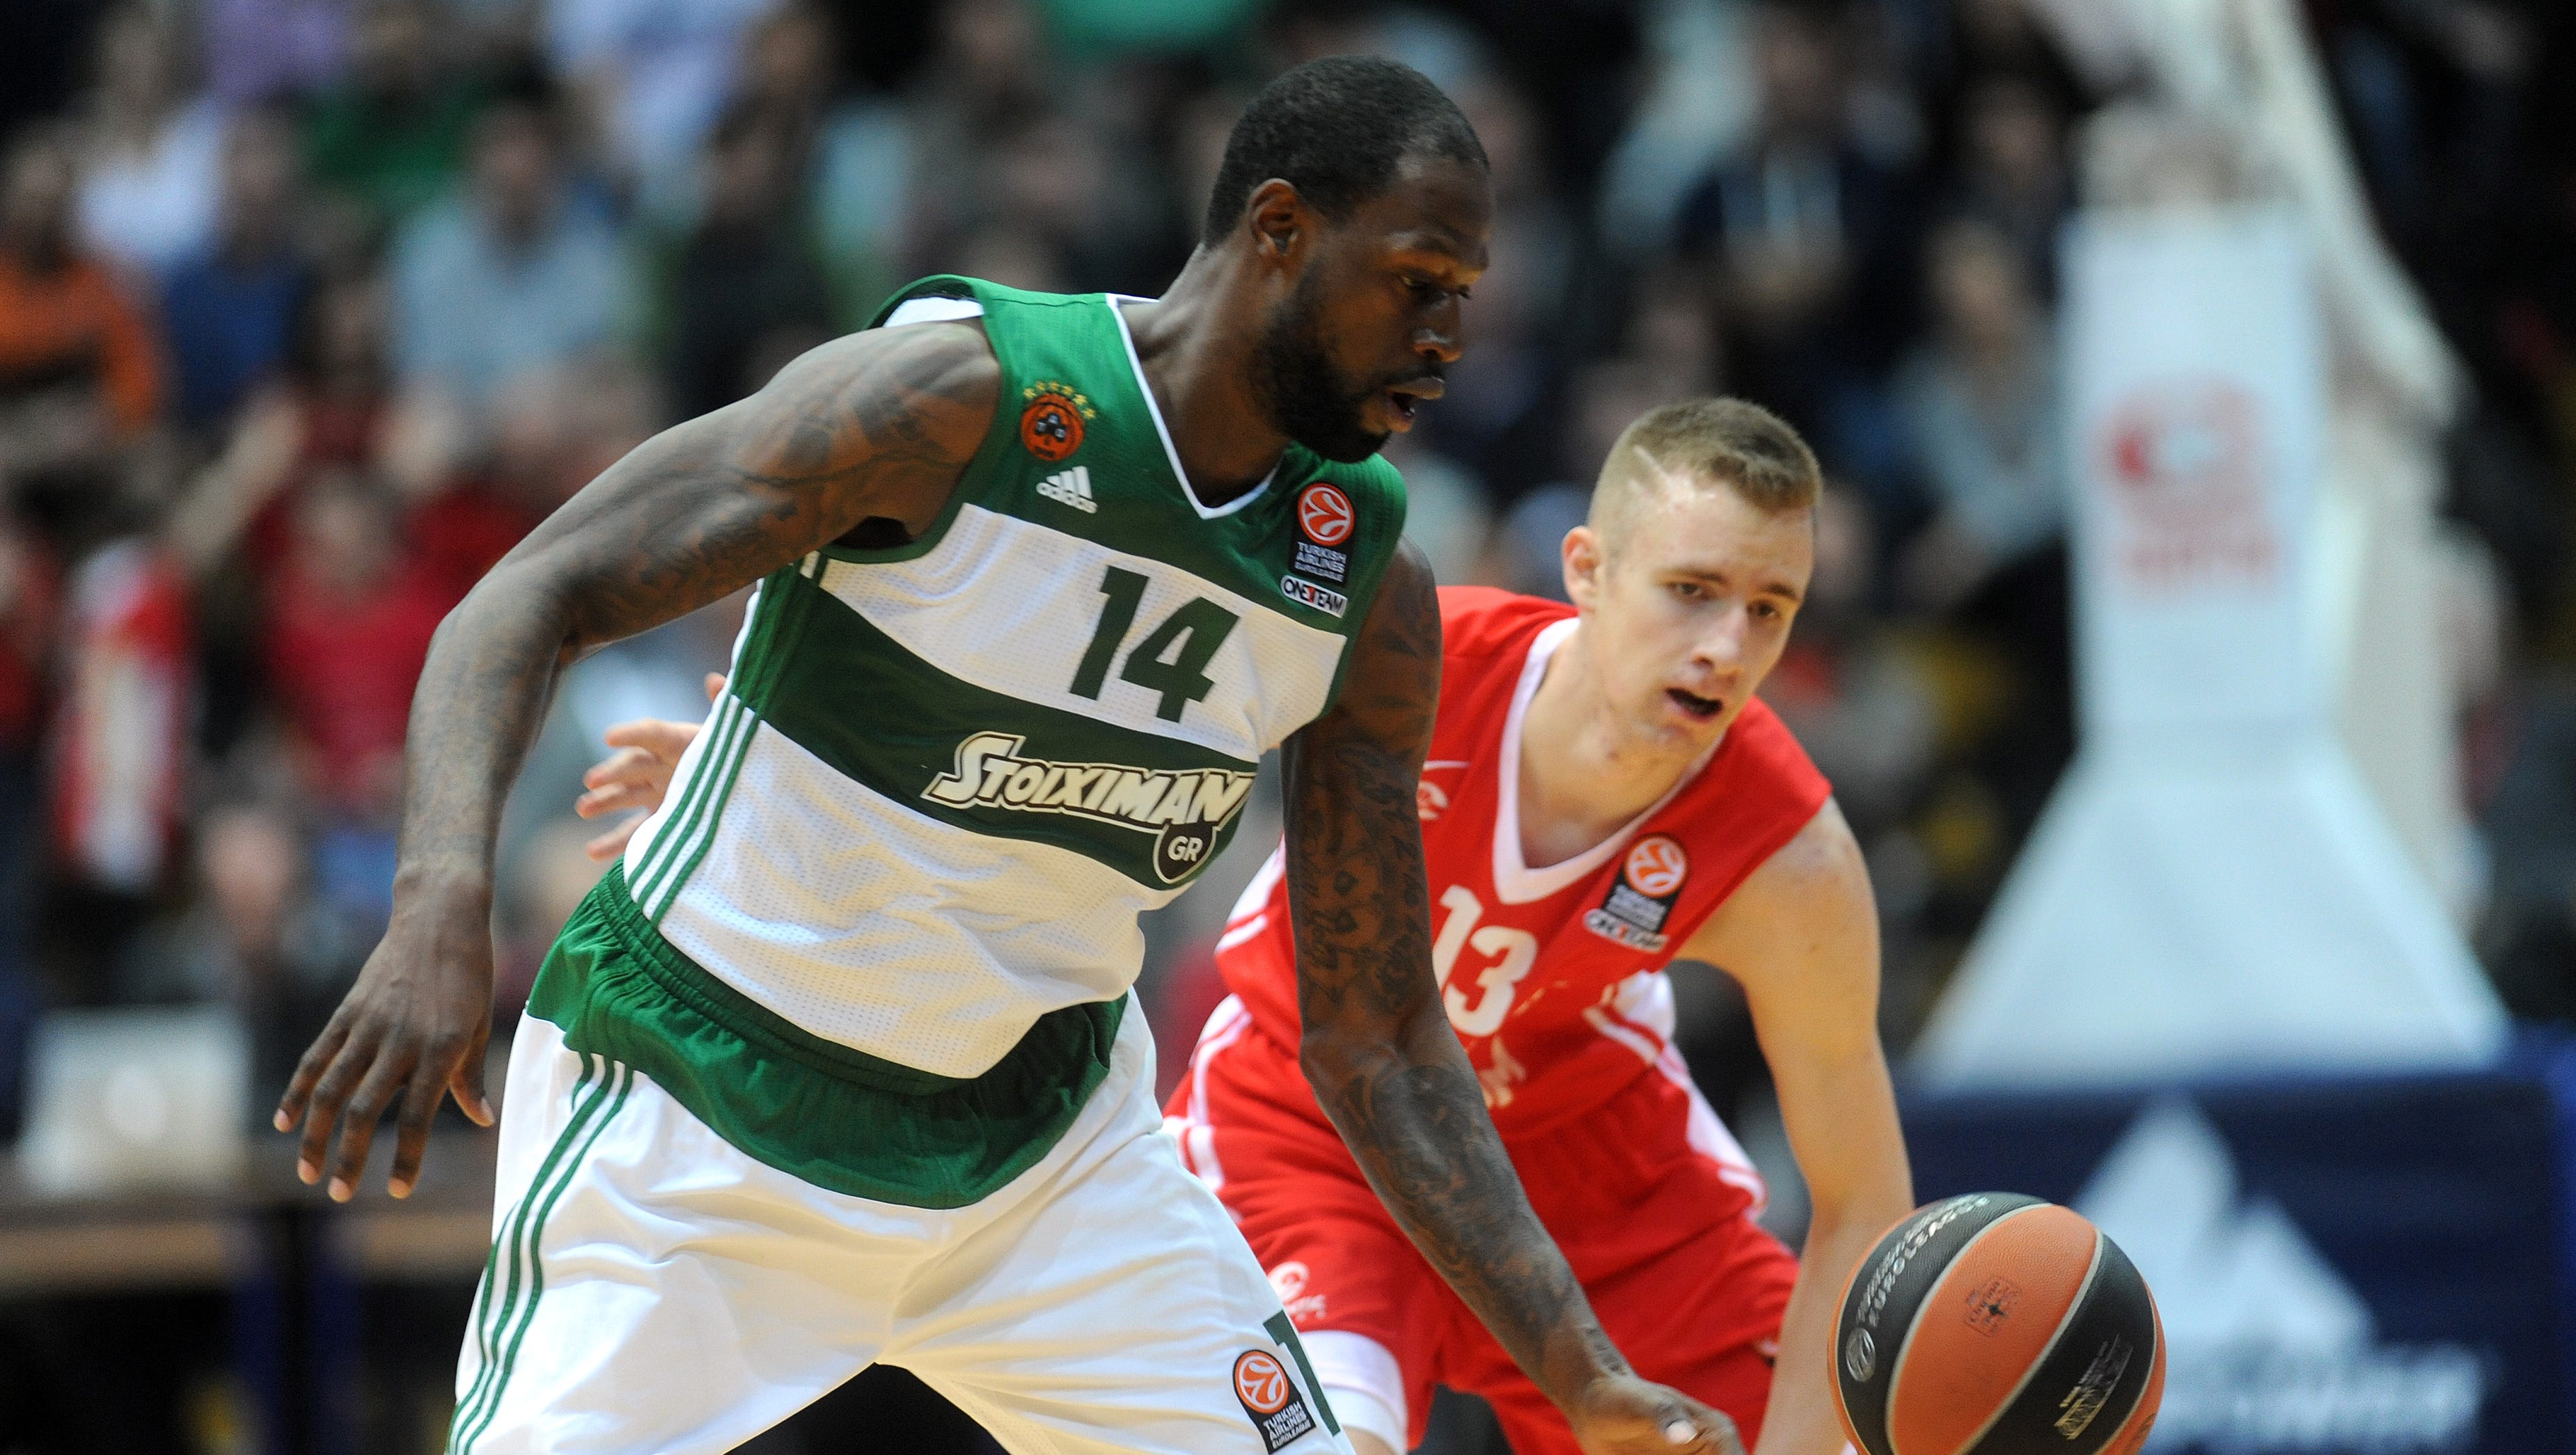 27. Boston Celtics: Dzanan Musa (right), SF, Bosnia. The Celtics will be the favorites in the East next season and don’t have very pressing needs, so they can go in a number of directions with this pick. He's 6-9, but has a nice nose for scoring the ball. They could look at an option such as Moritz Wagner, also, as a versatile shooting big man.